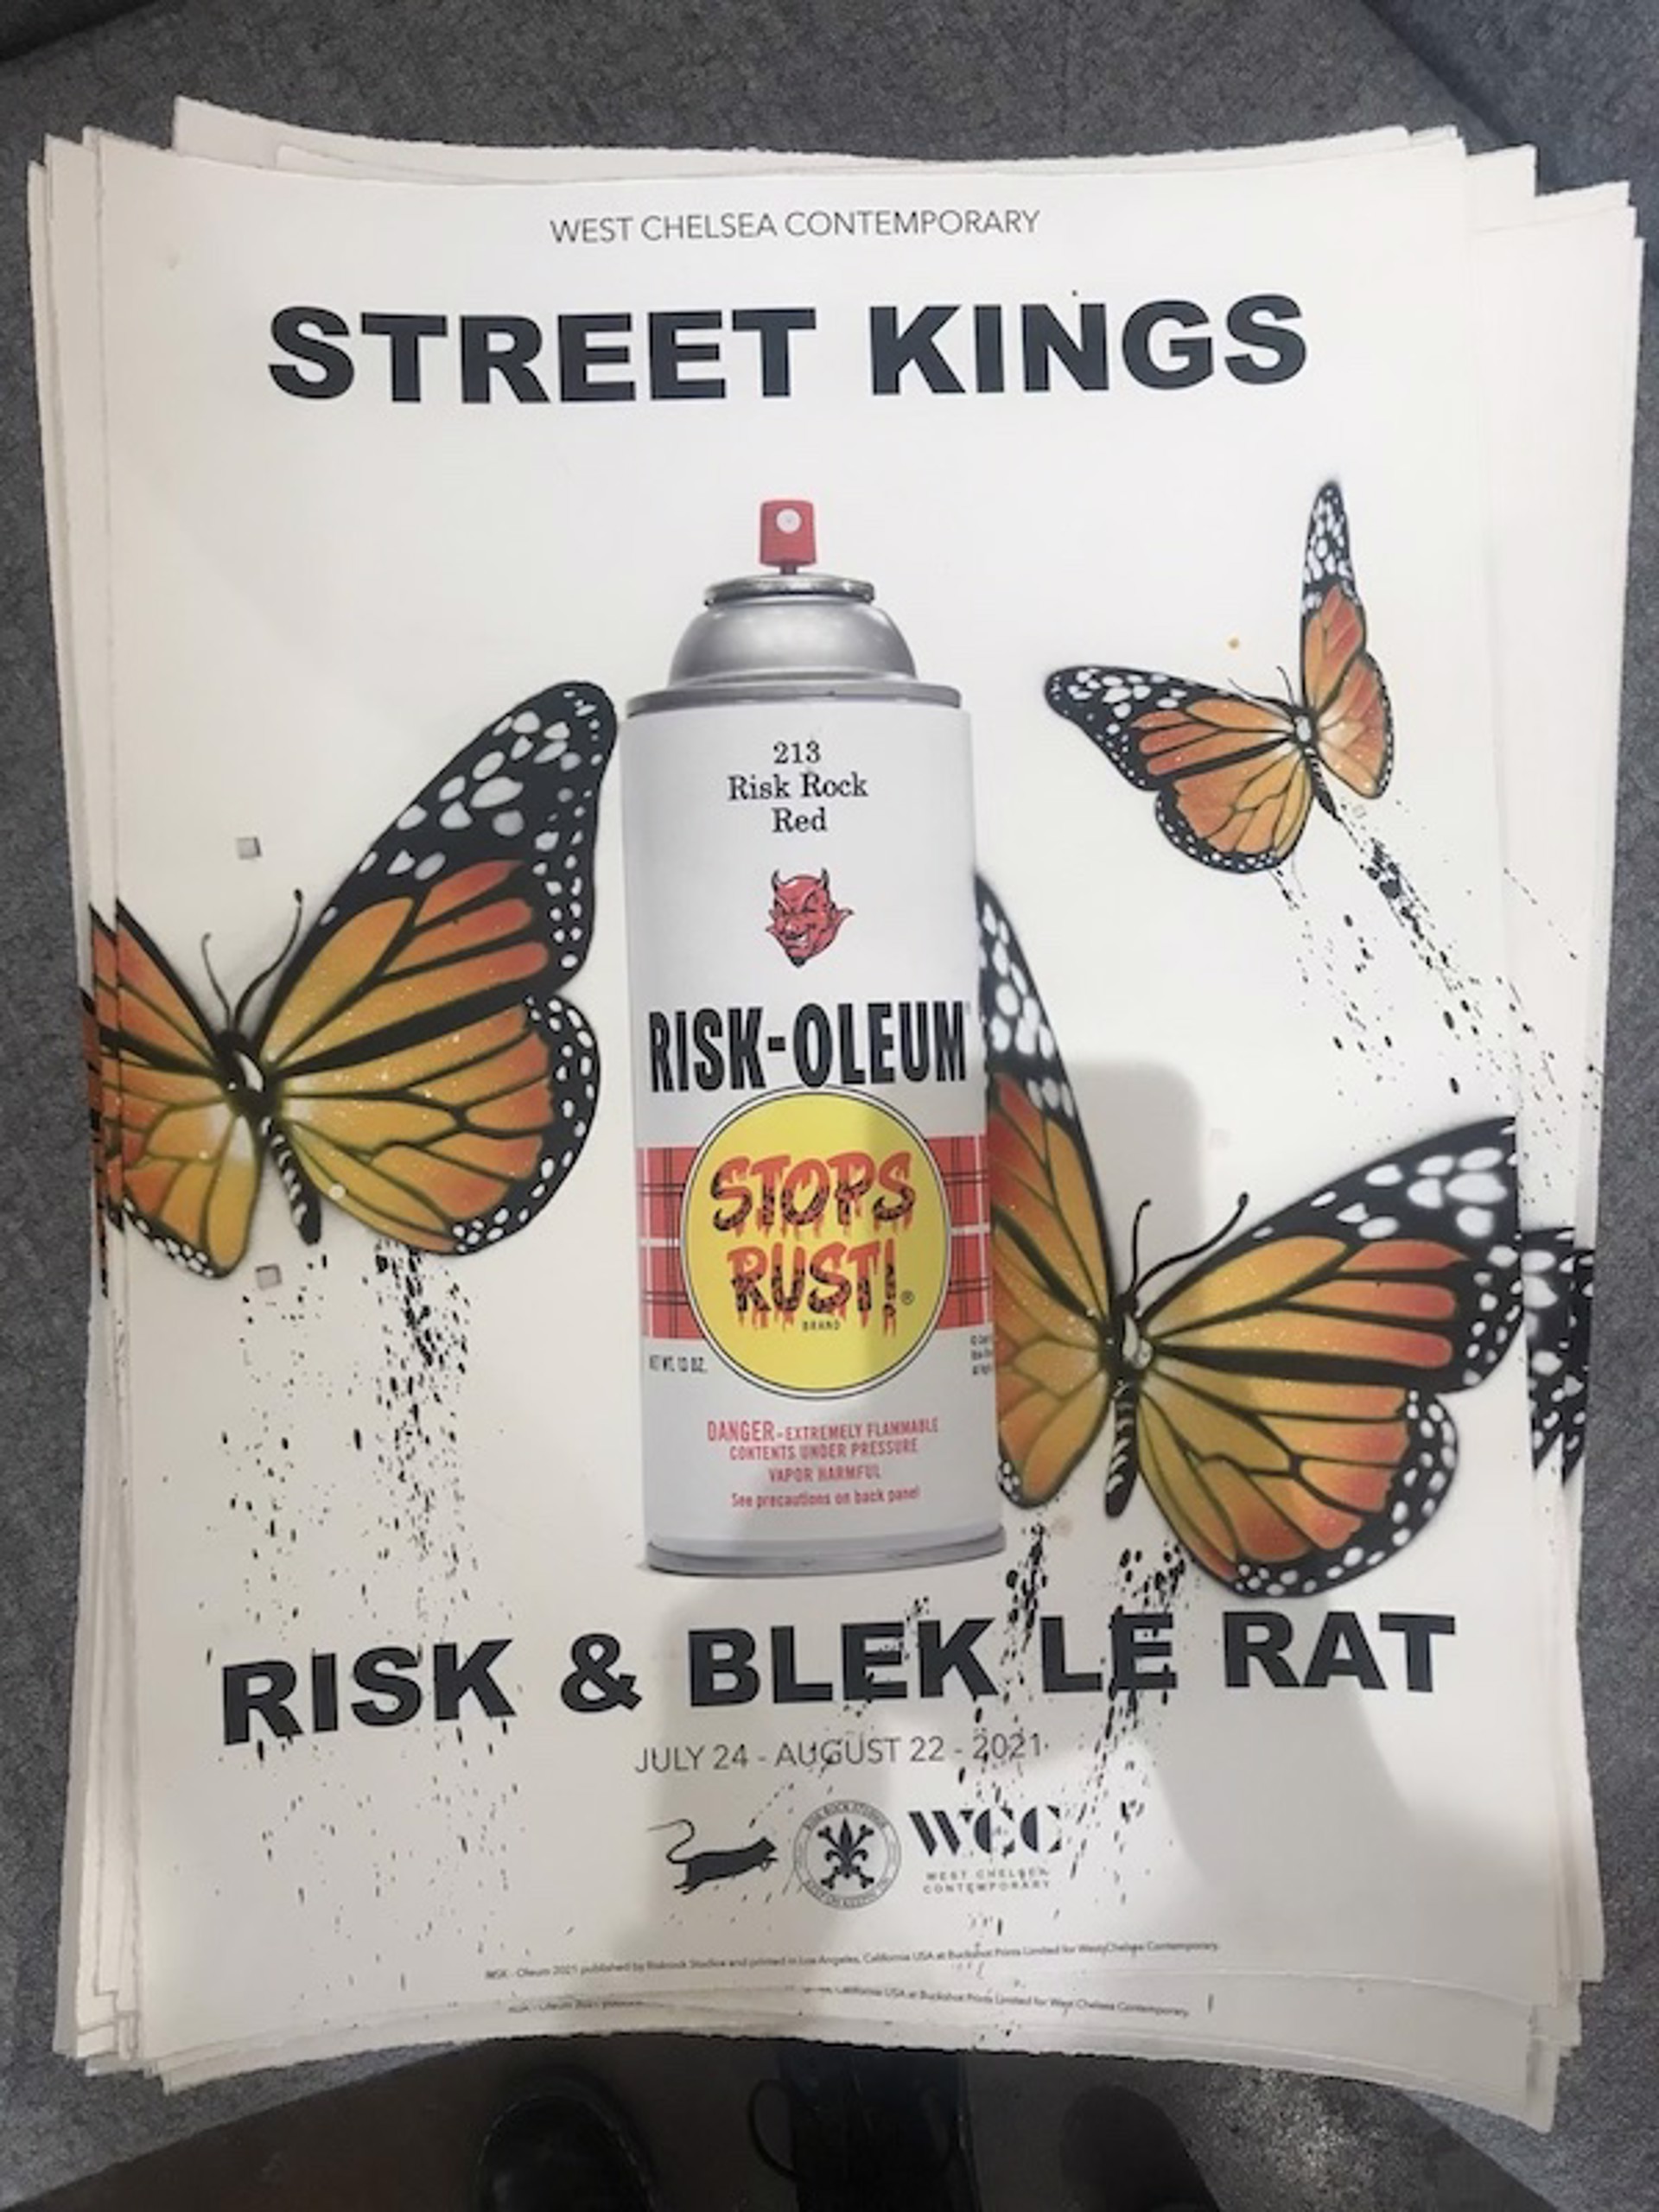 Street Kings Show Print (27/50) by Risk